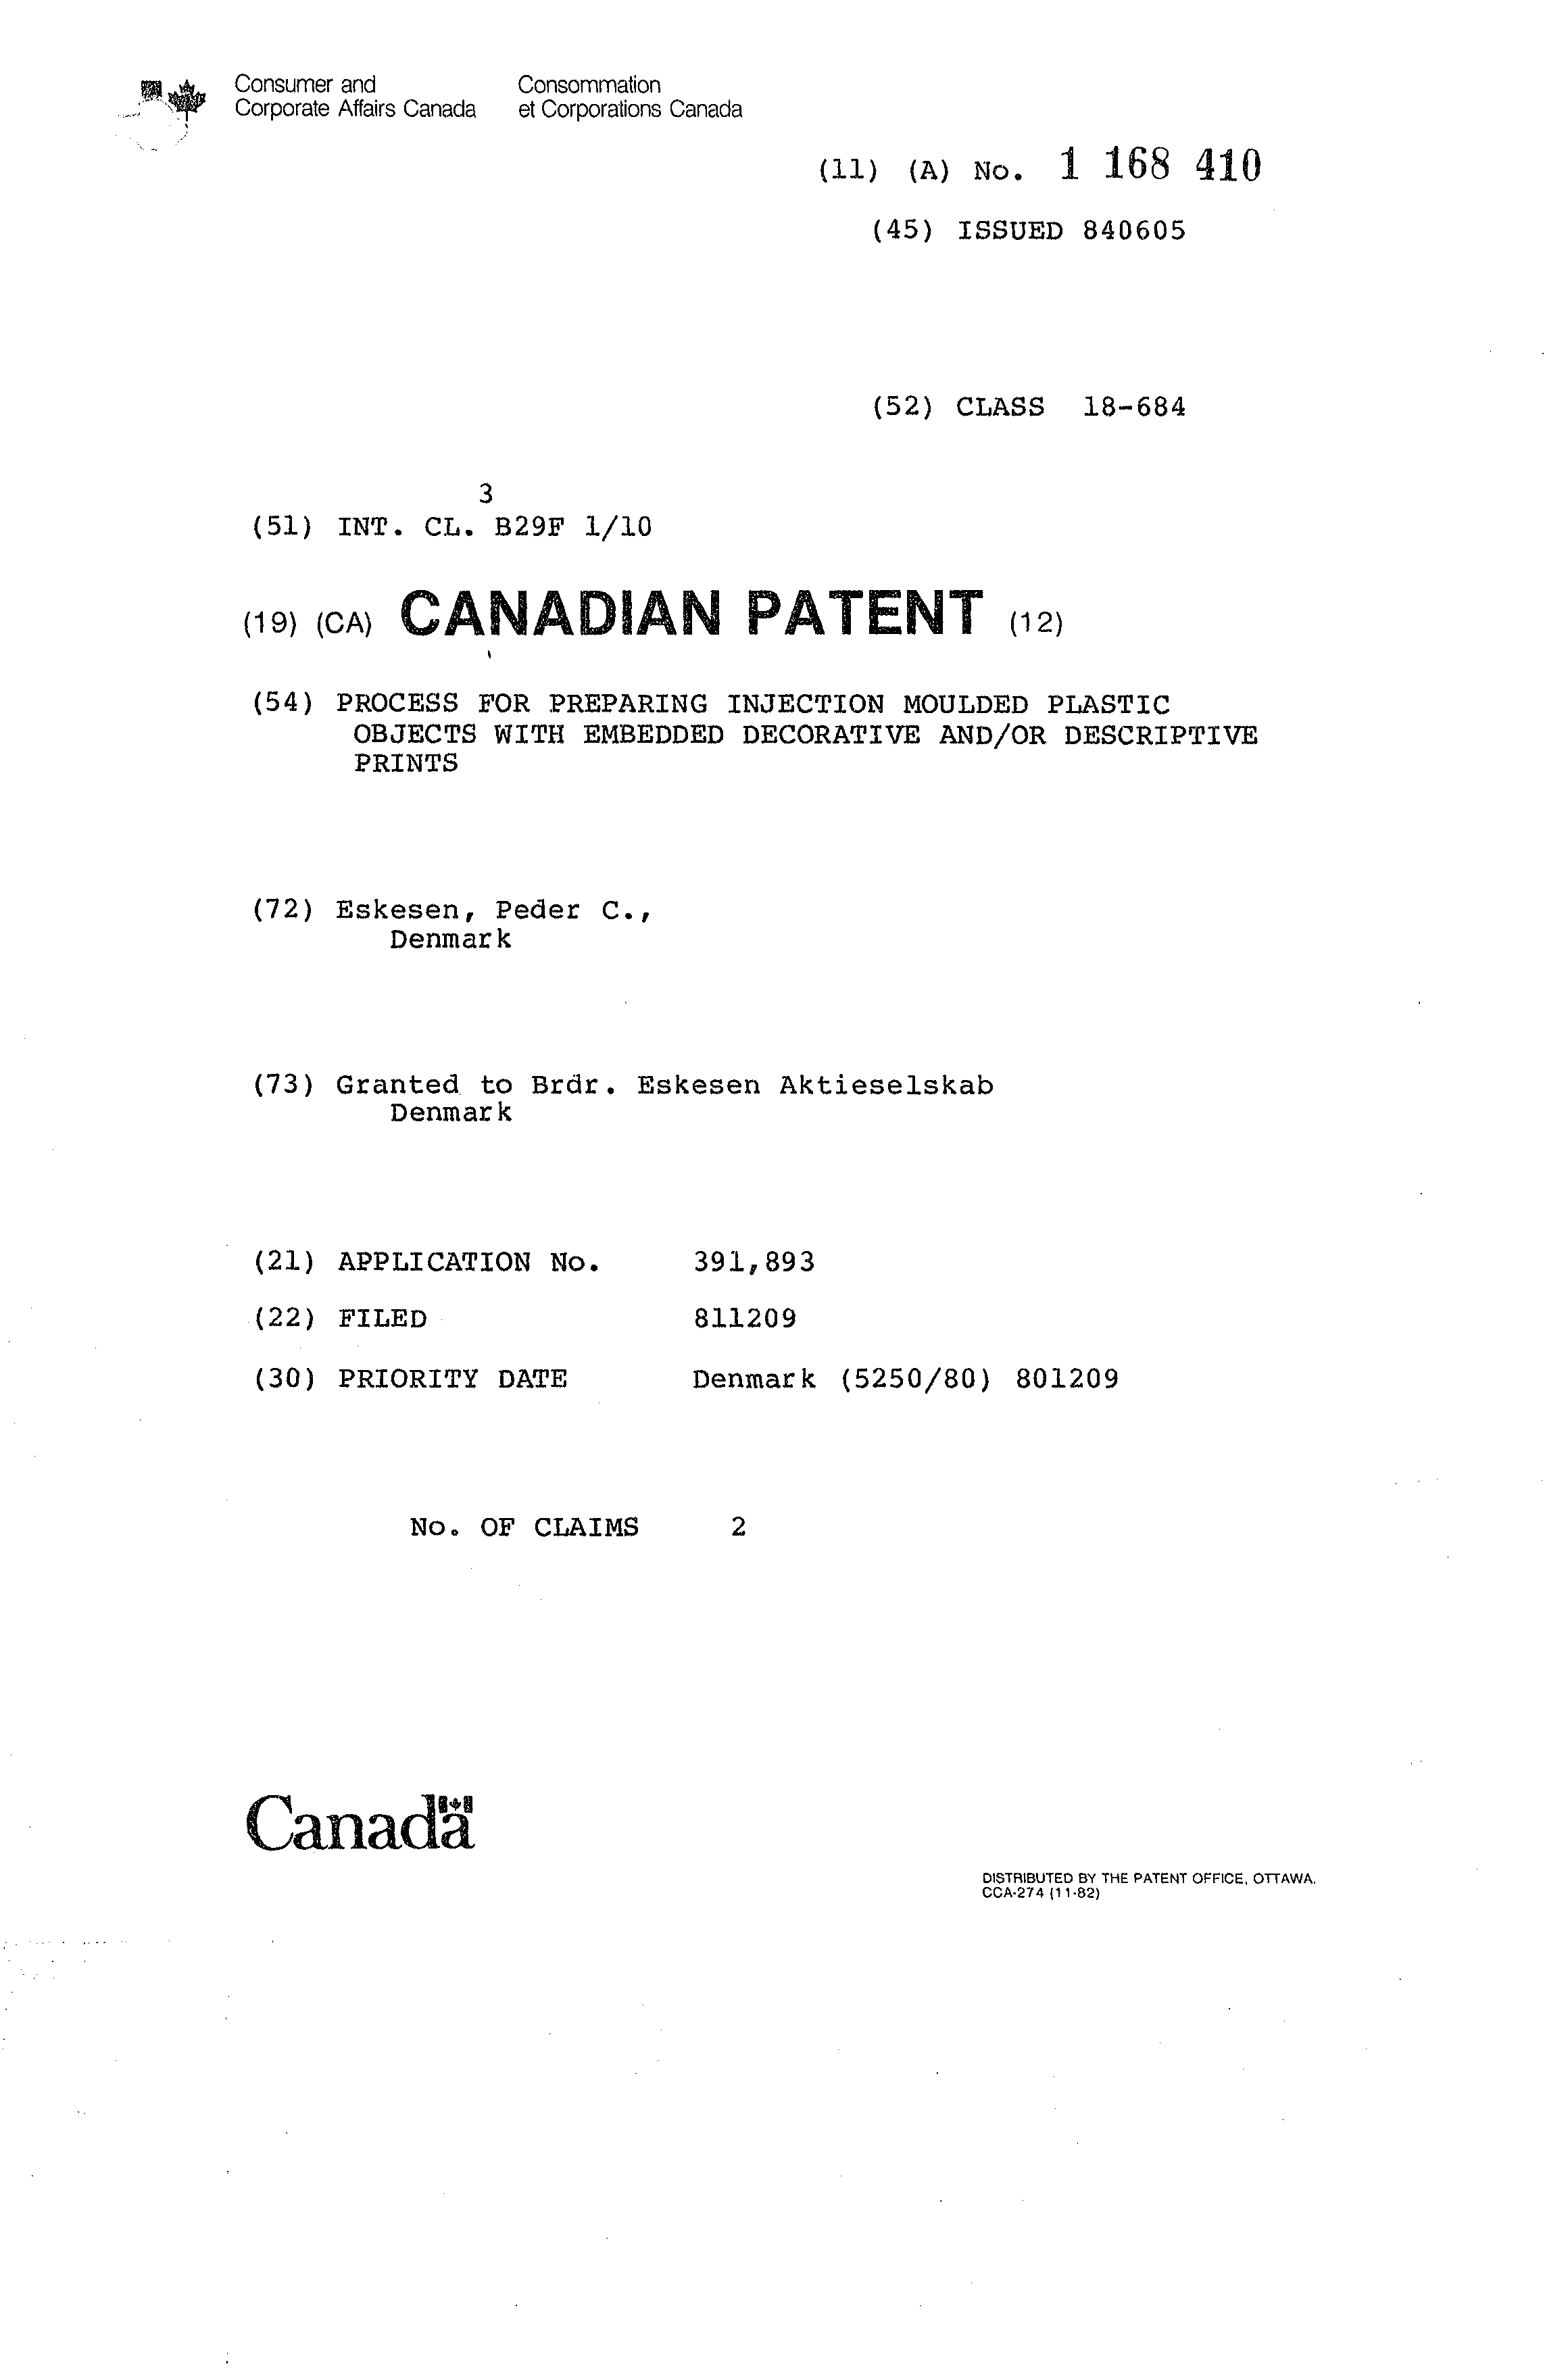 Canadian Patent Document 1168410. Cover Page 19931208. Image 1 of 1